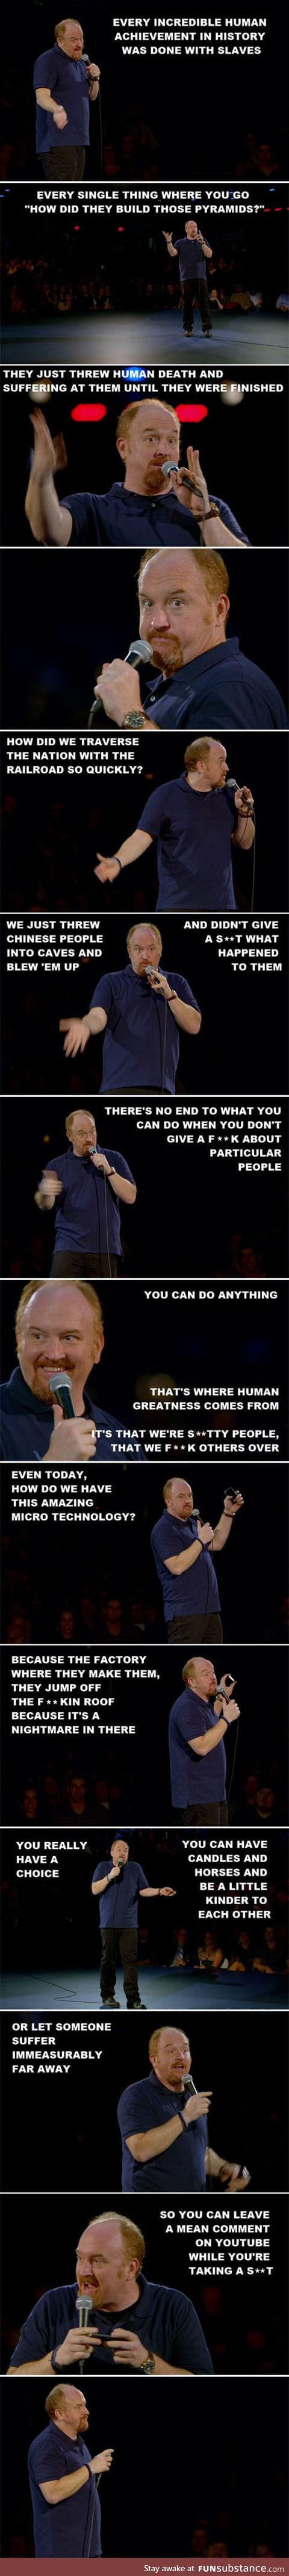 Louis C.K. On our human nature